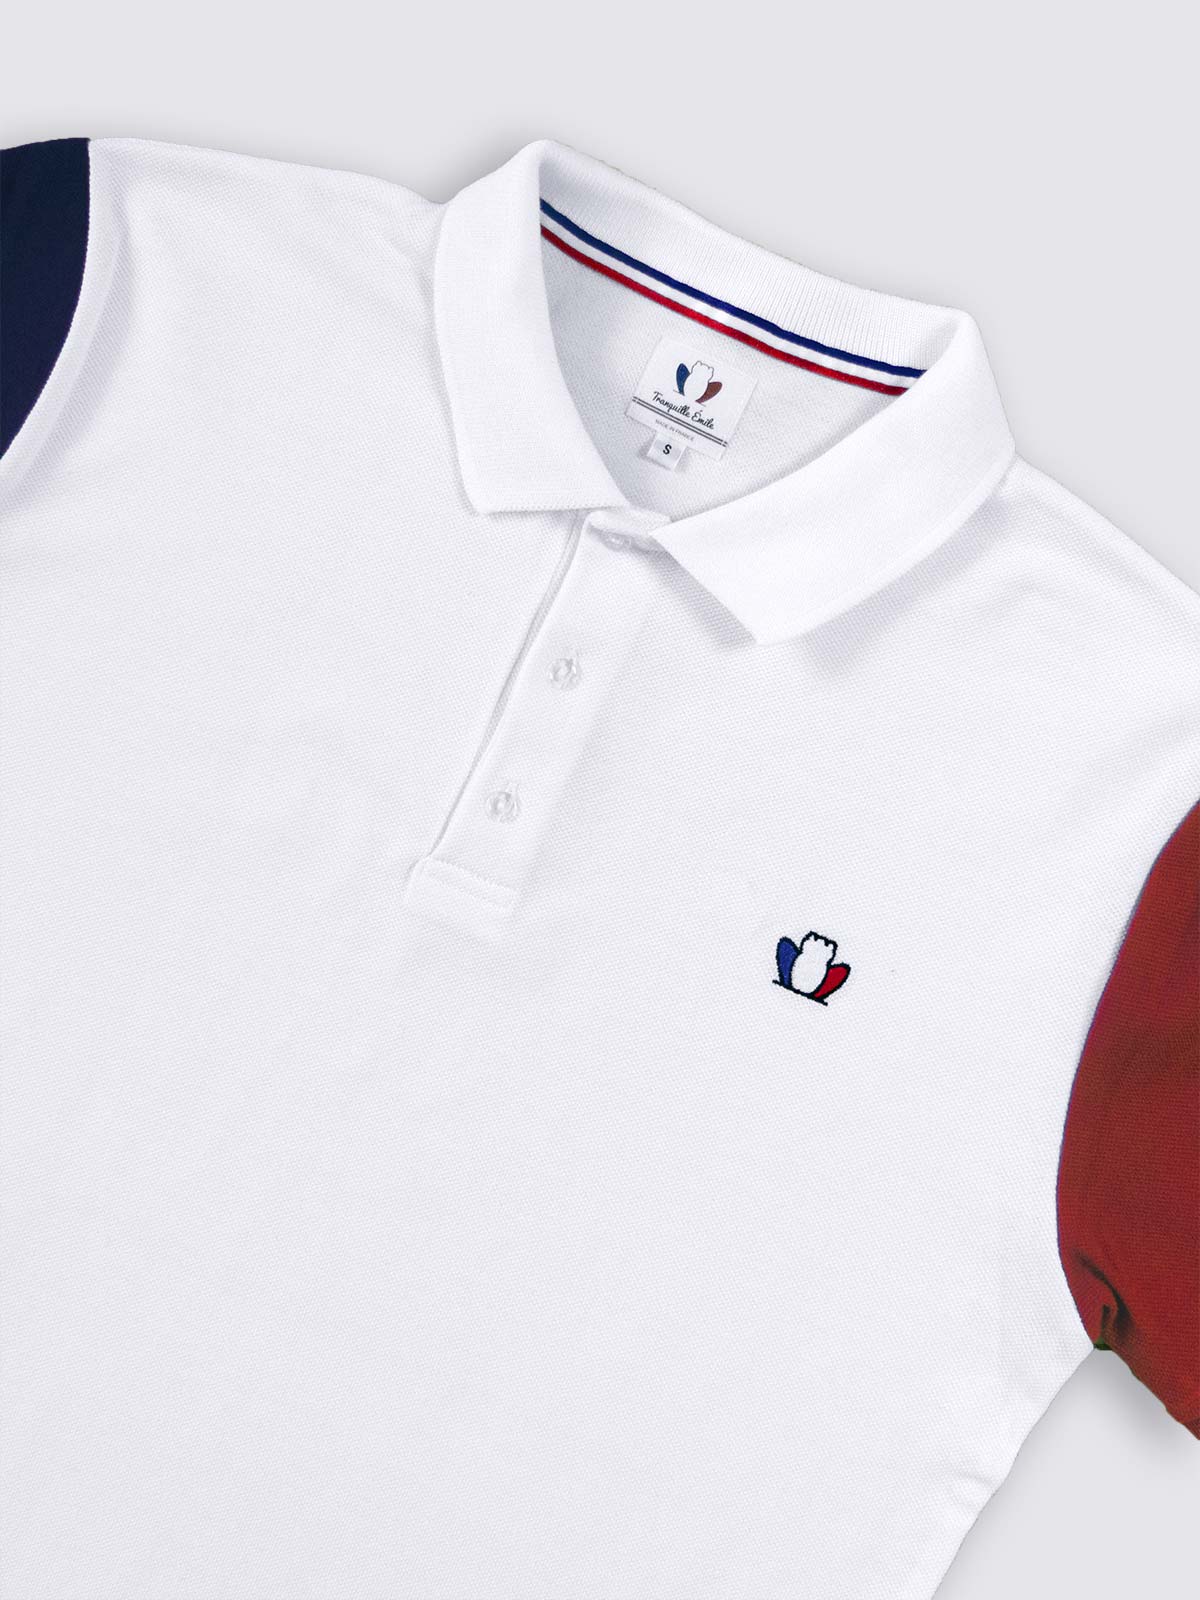 polo-made-in-france-homme-l-elegant-3-0-tricolore-2